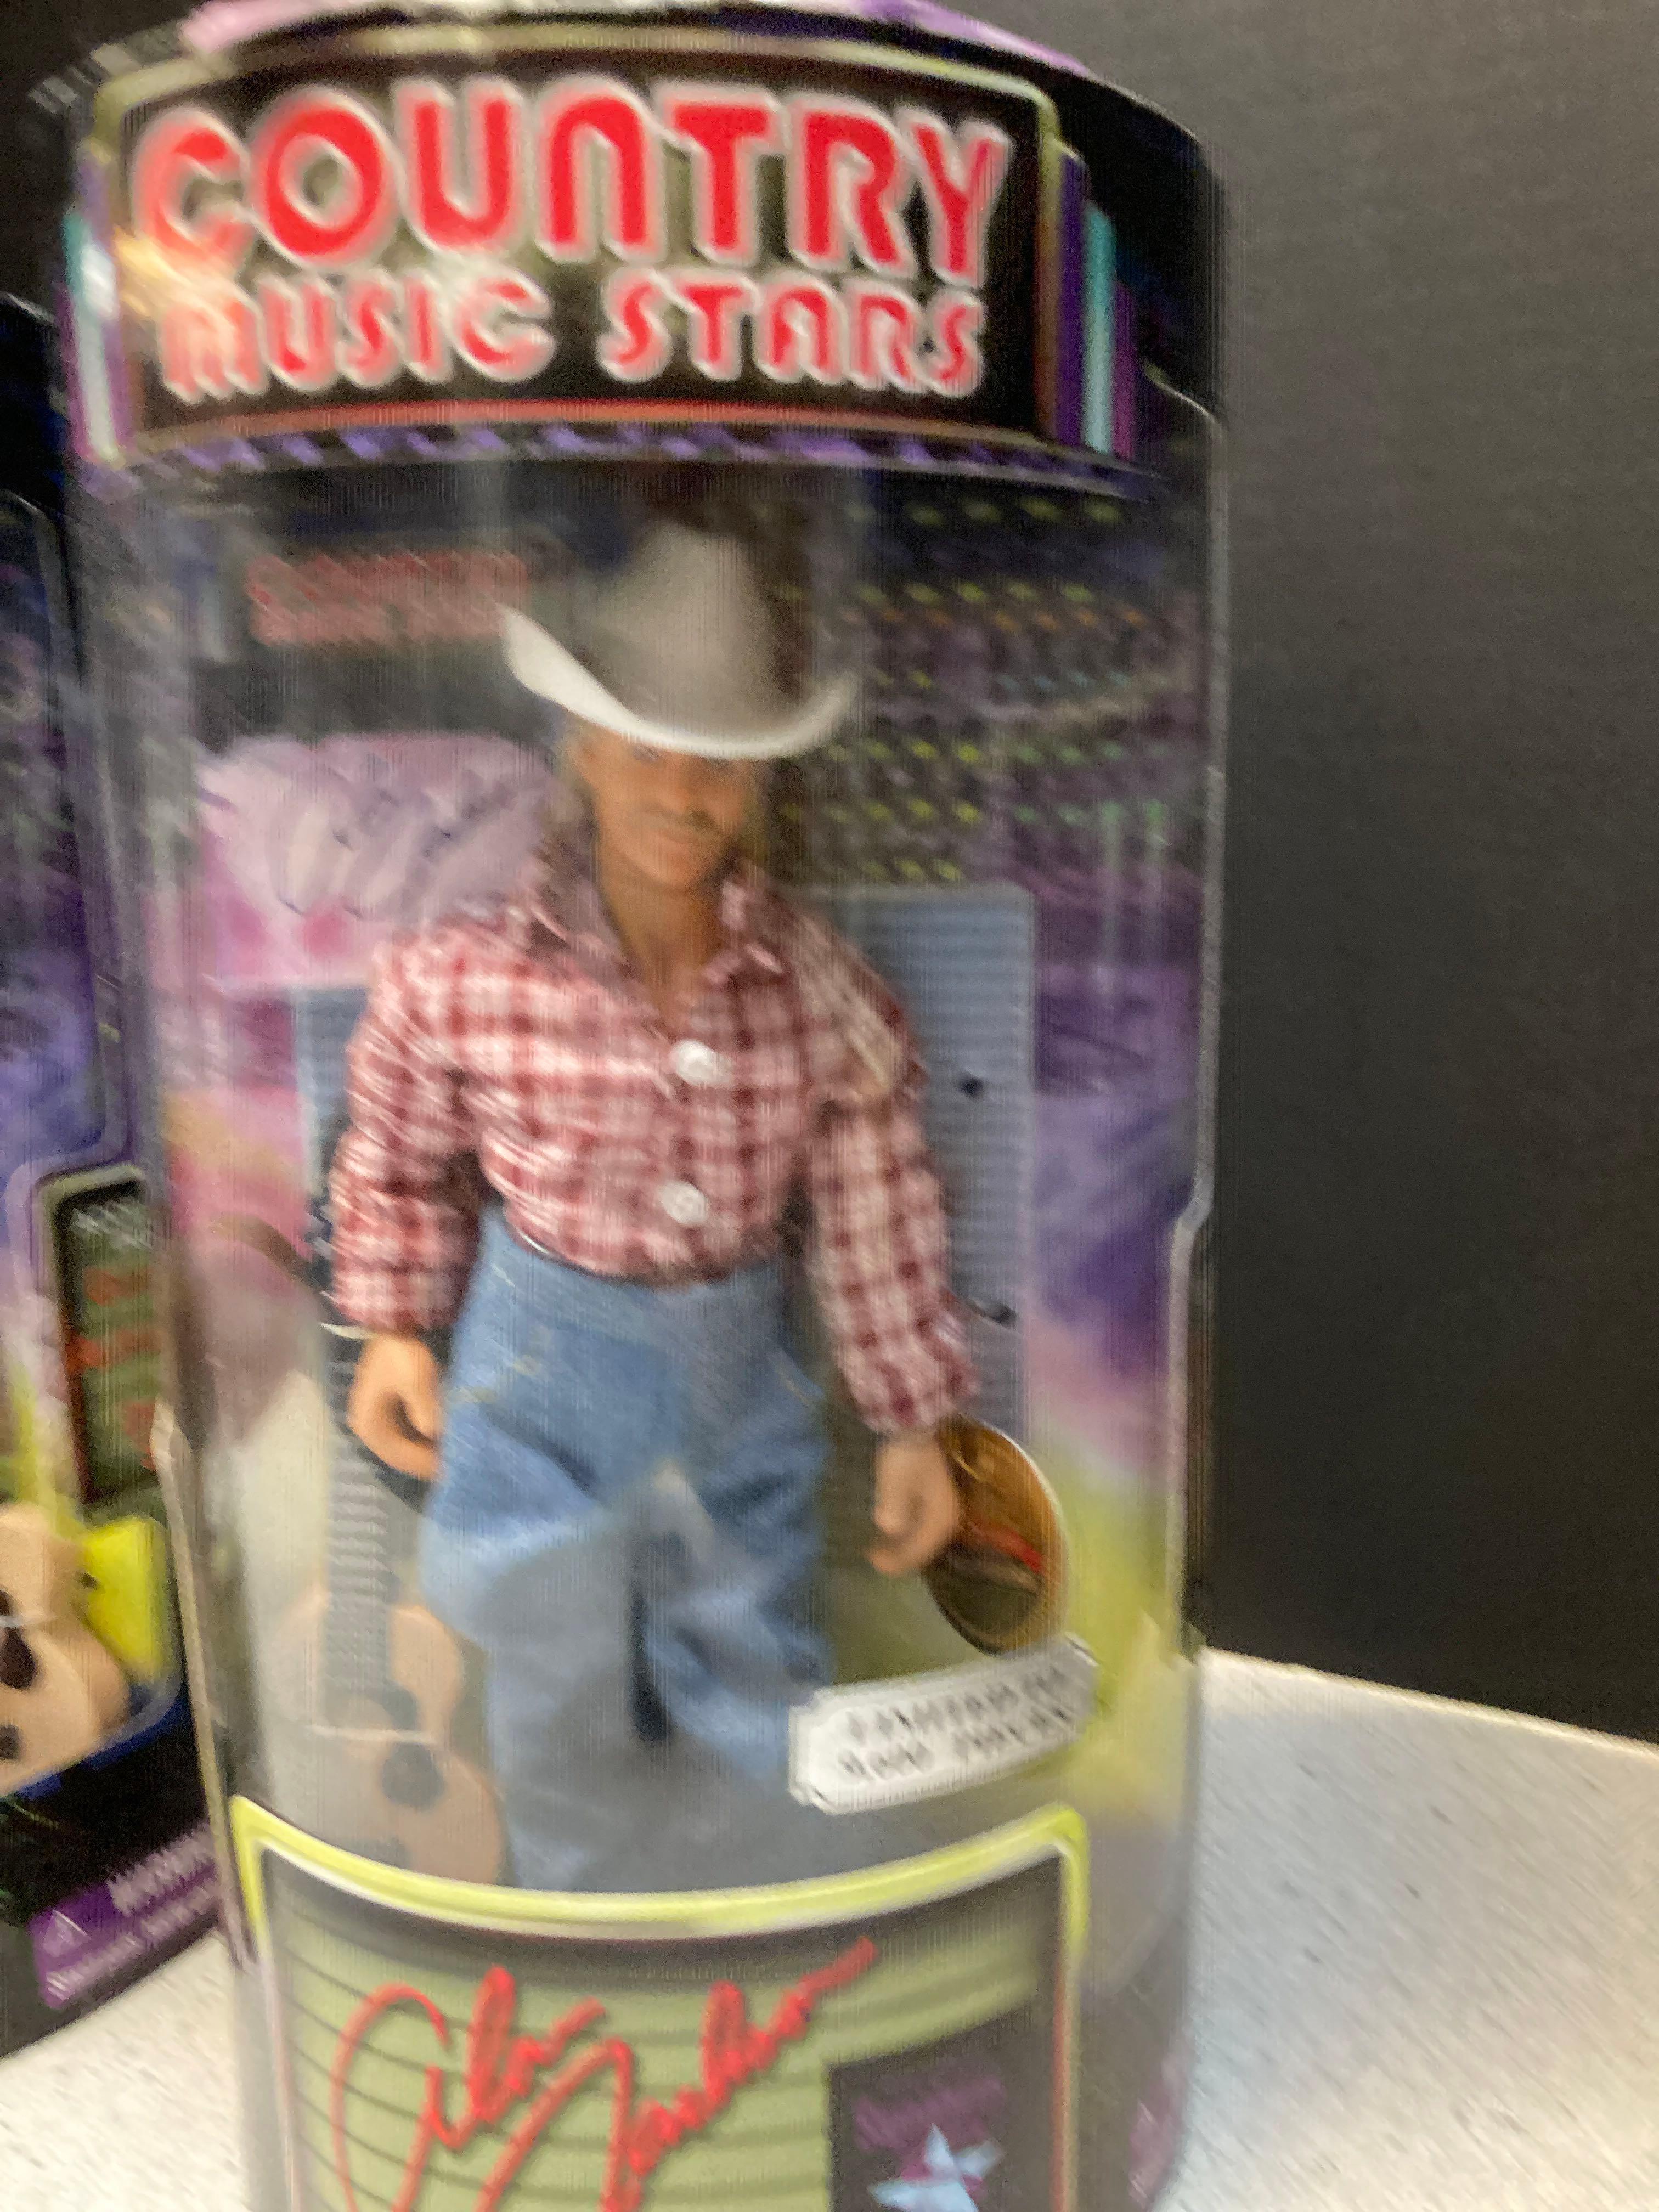 Country music stars poseable figures and the best of the worst dolls